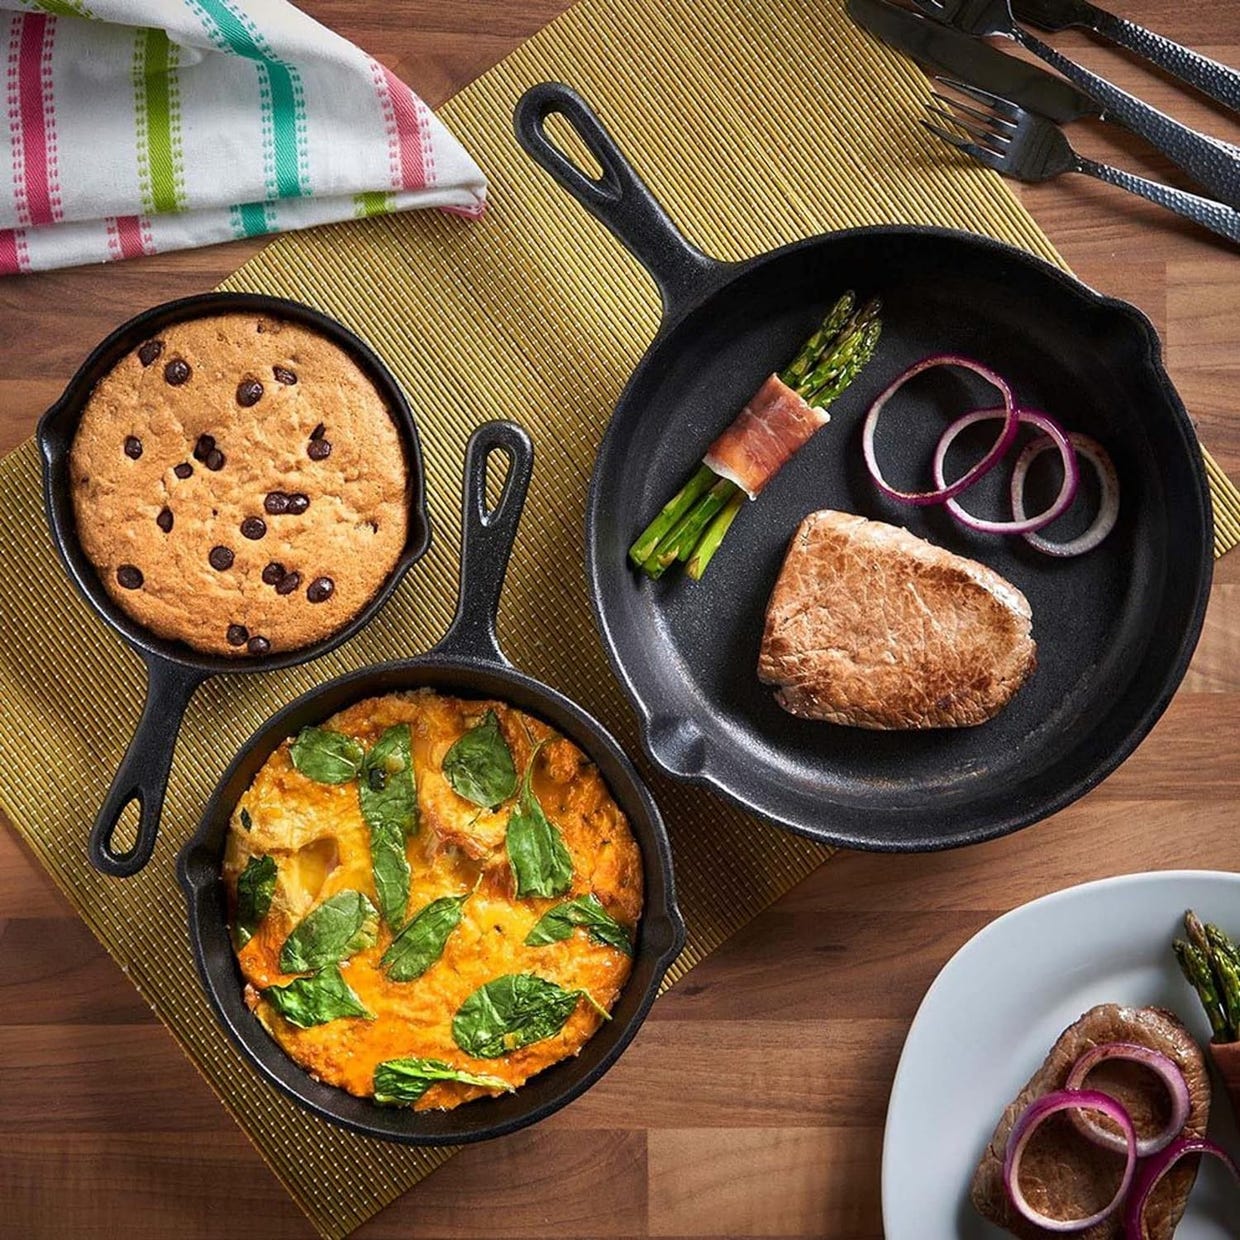 Three cast iron skillets with a chocolate chip cookie, a piece of steak with asparagus and onions, and an egg frittata.